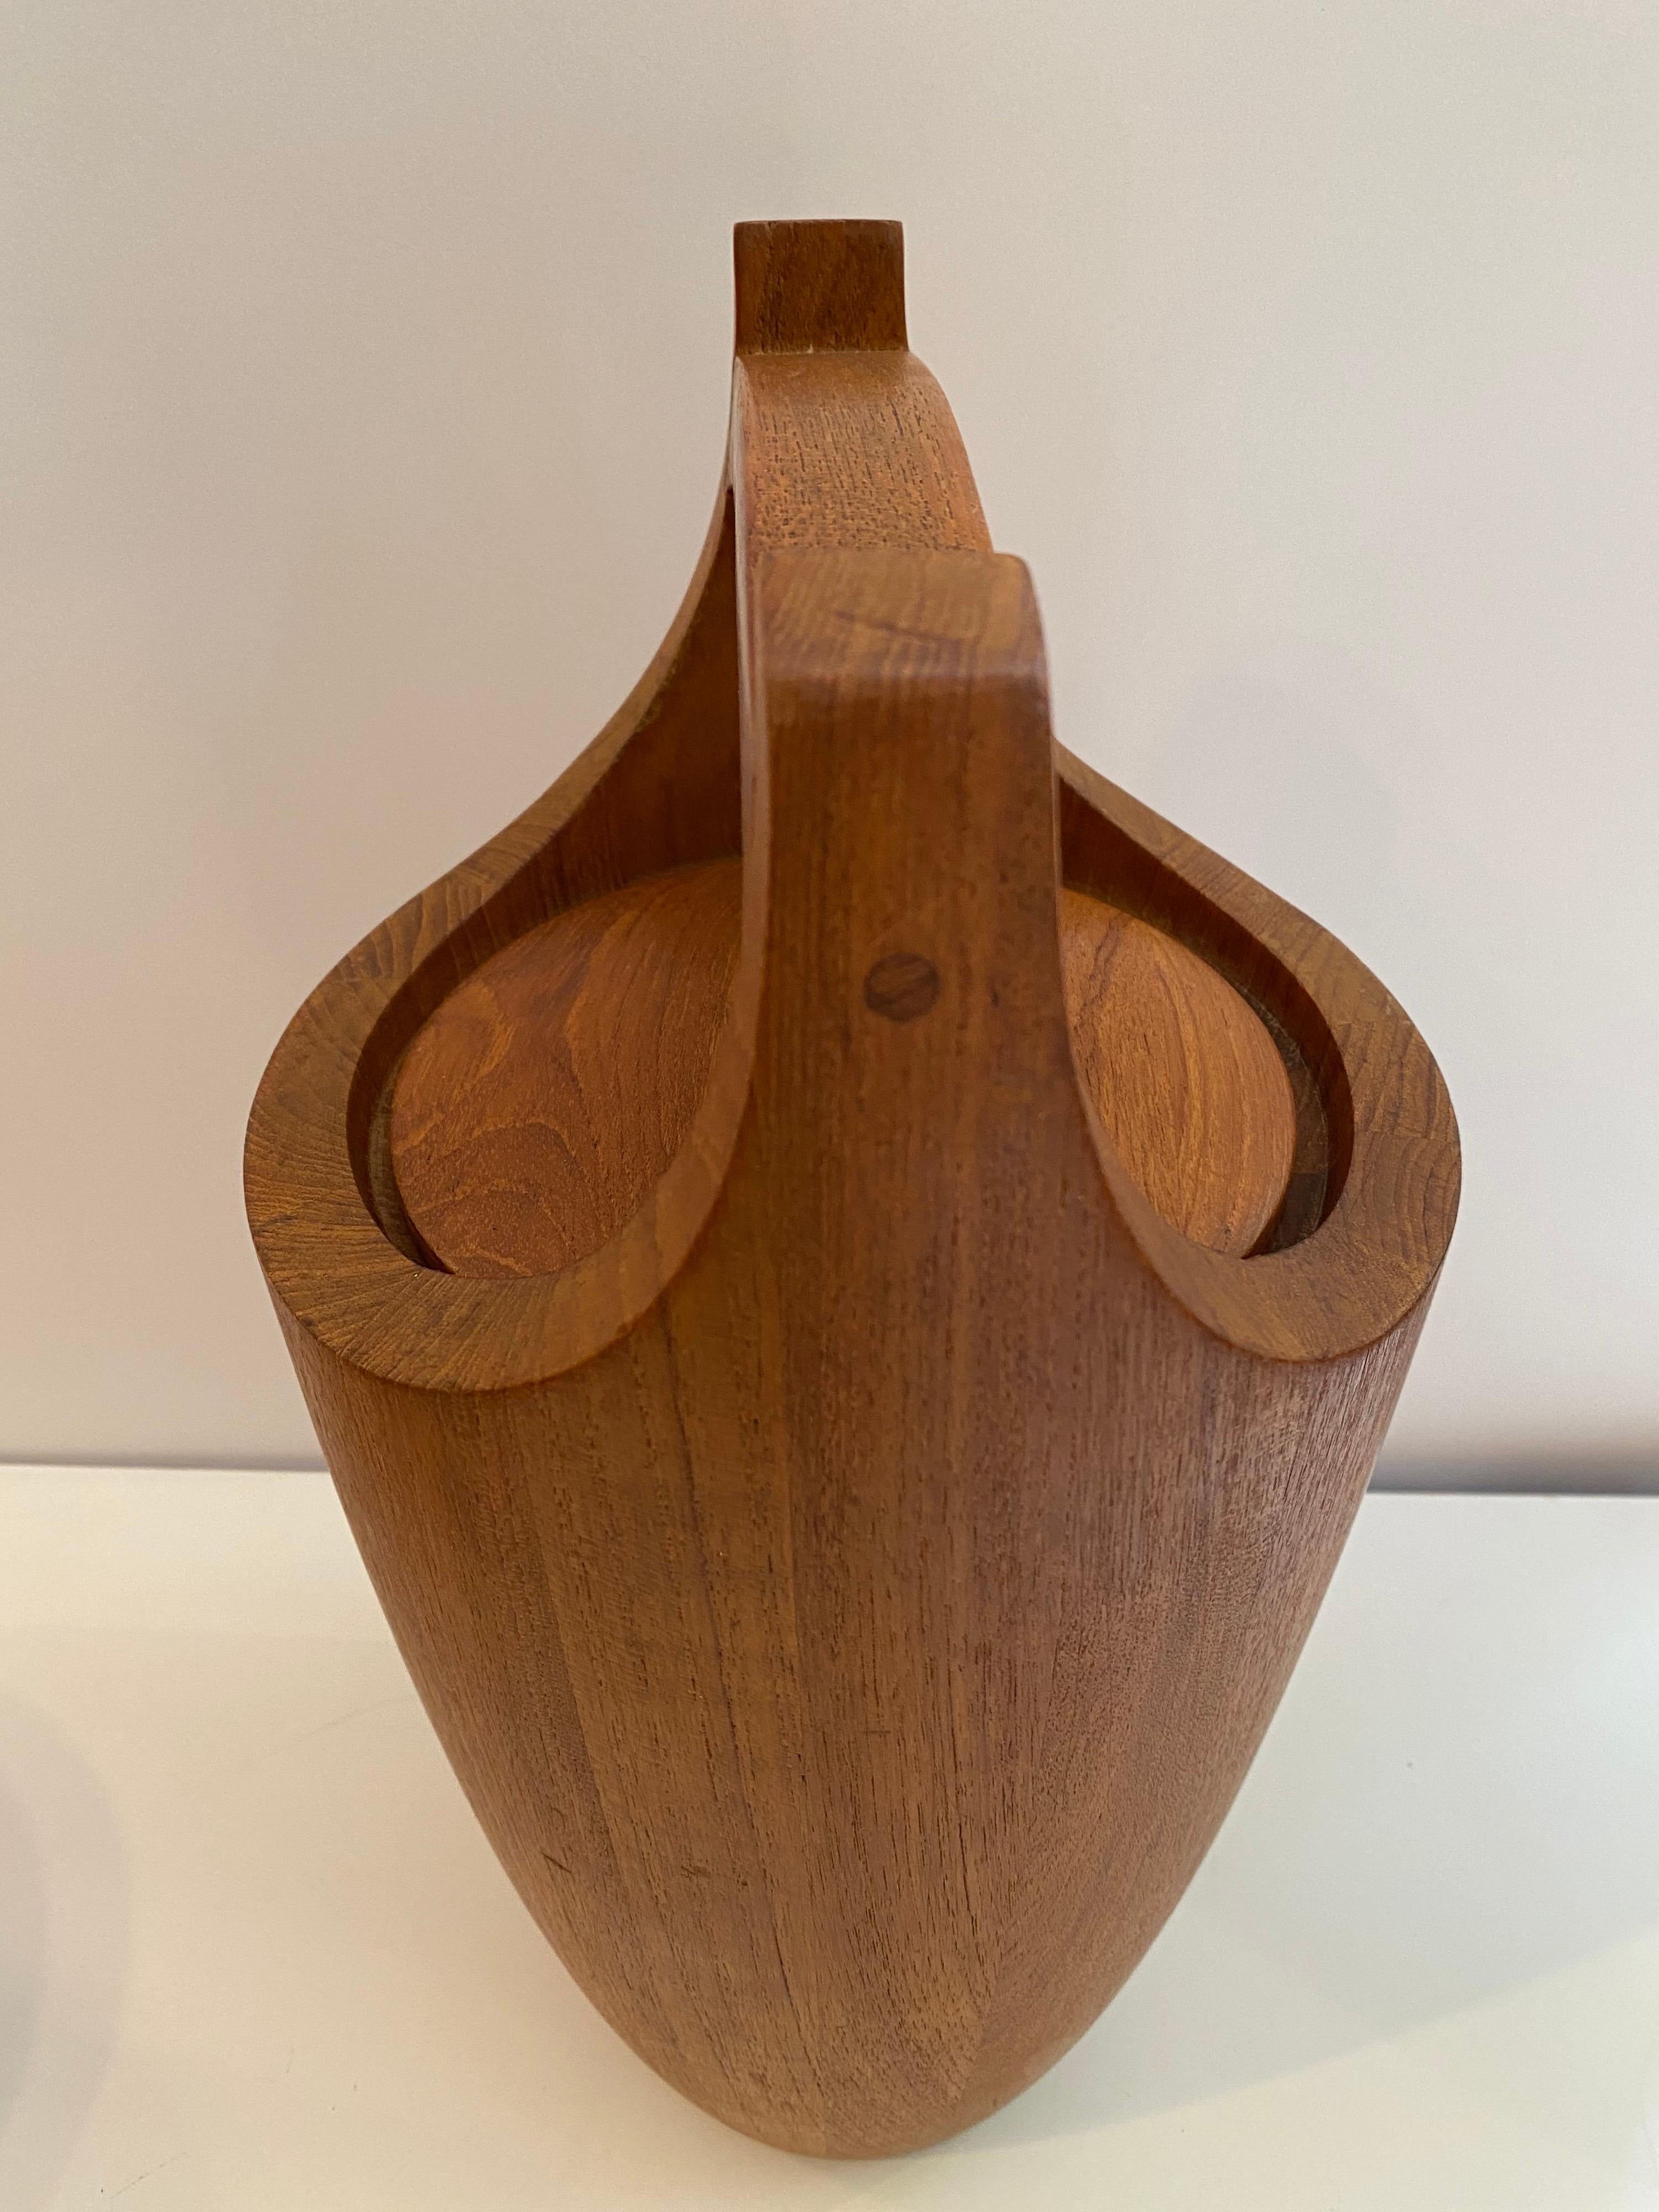 Classic Dansk teak ice bucket, tall with a handle for ease of carrying. Probably one of the most famous and best designed ice bucket out there!